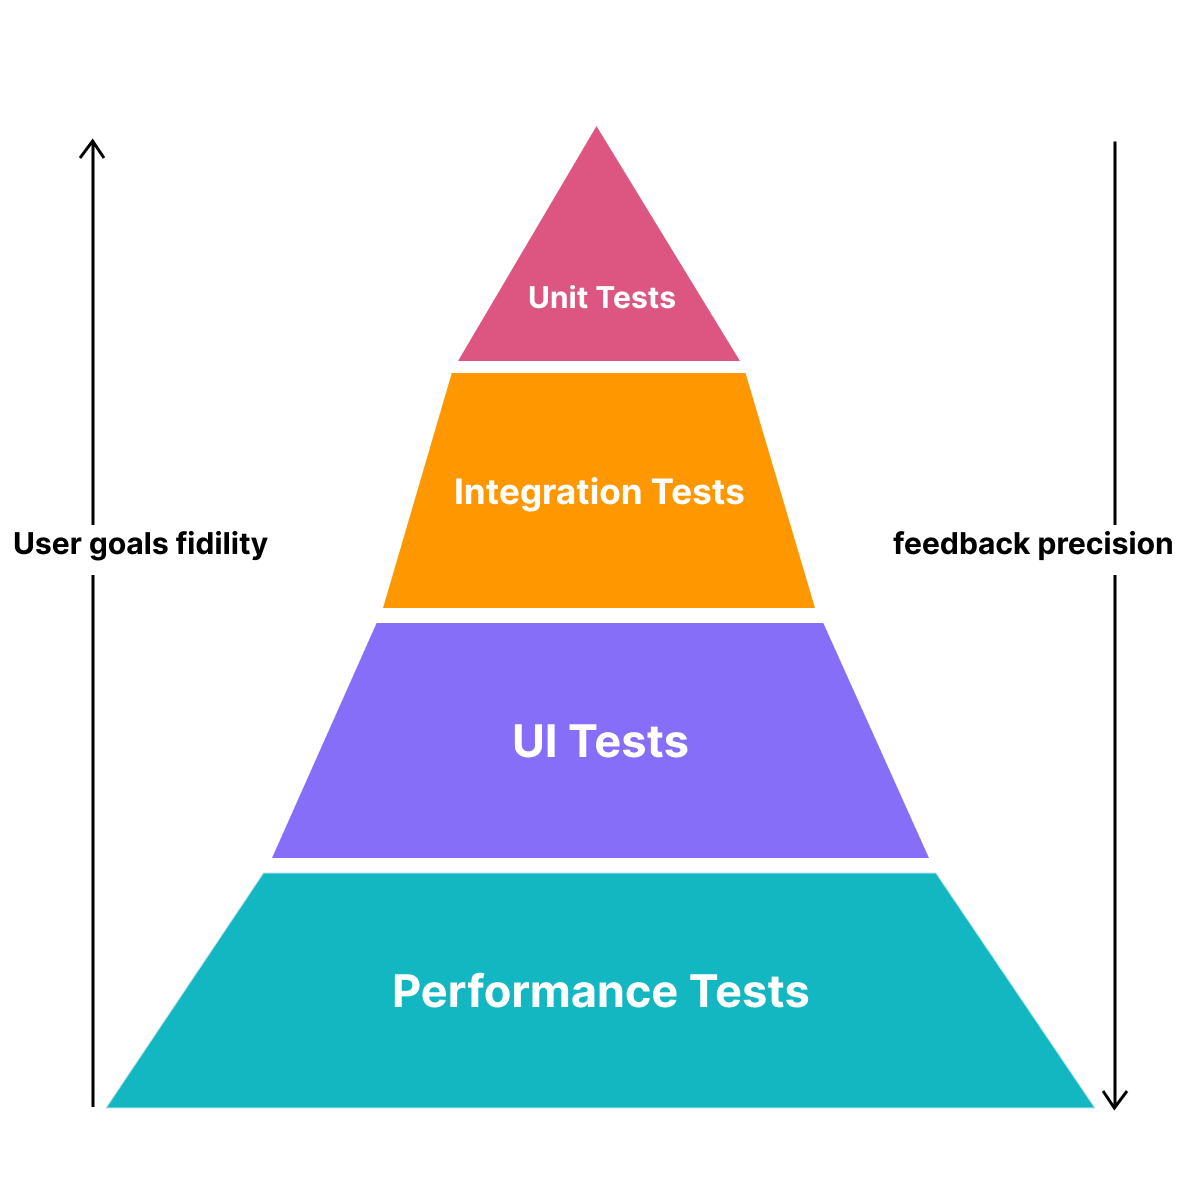 UI and performance tests